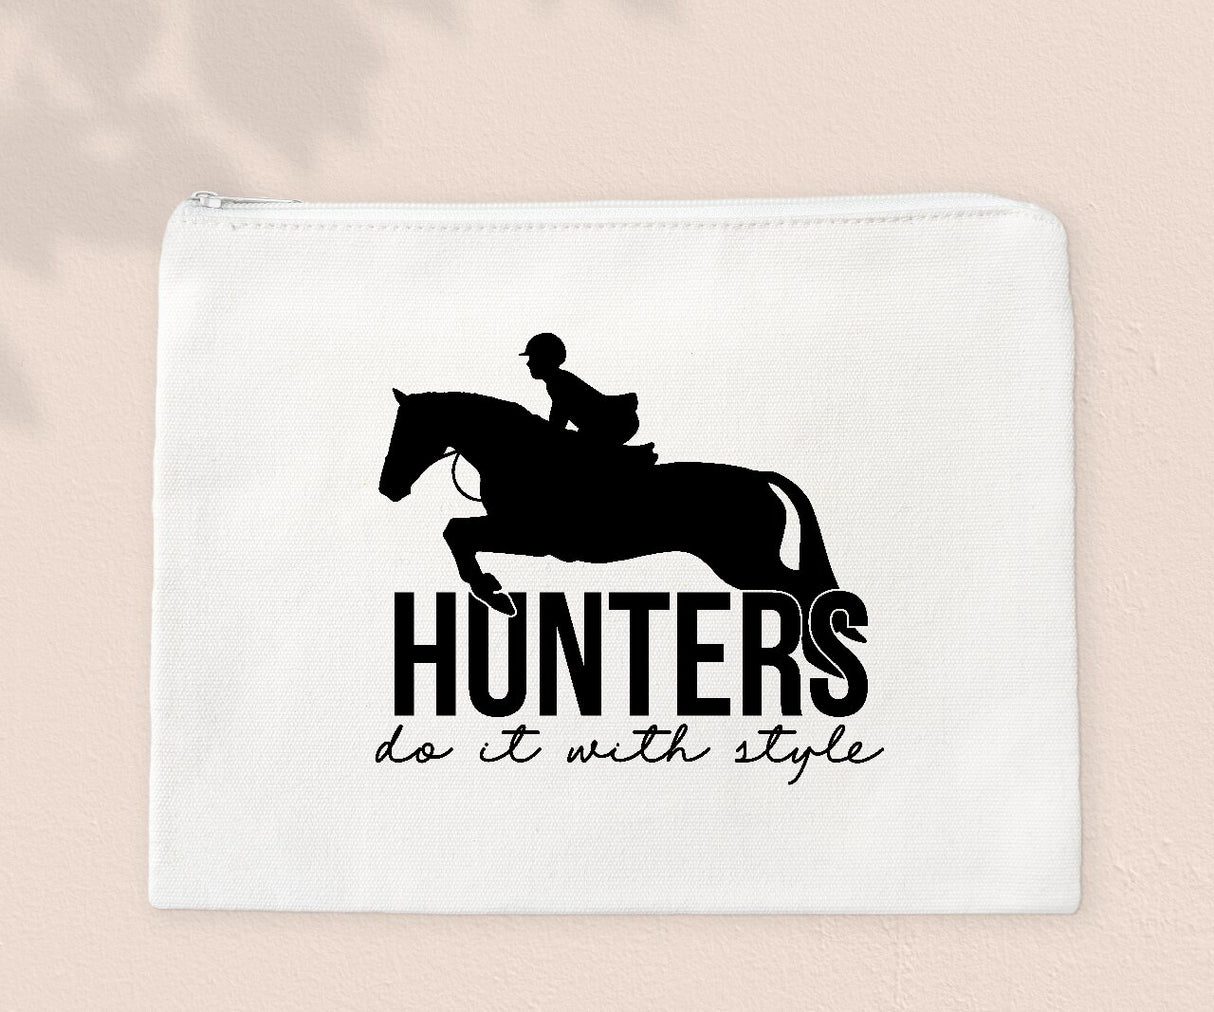 Hunters Do It With Style - Zipper Bags for Cosmetics, Pencils or Show Cash